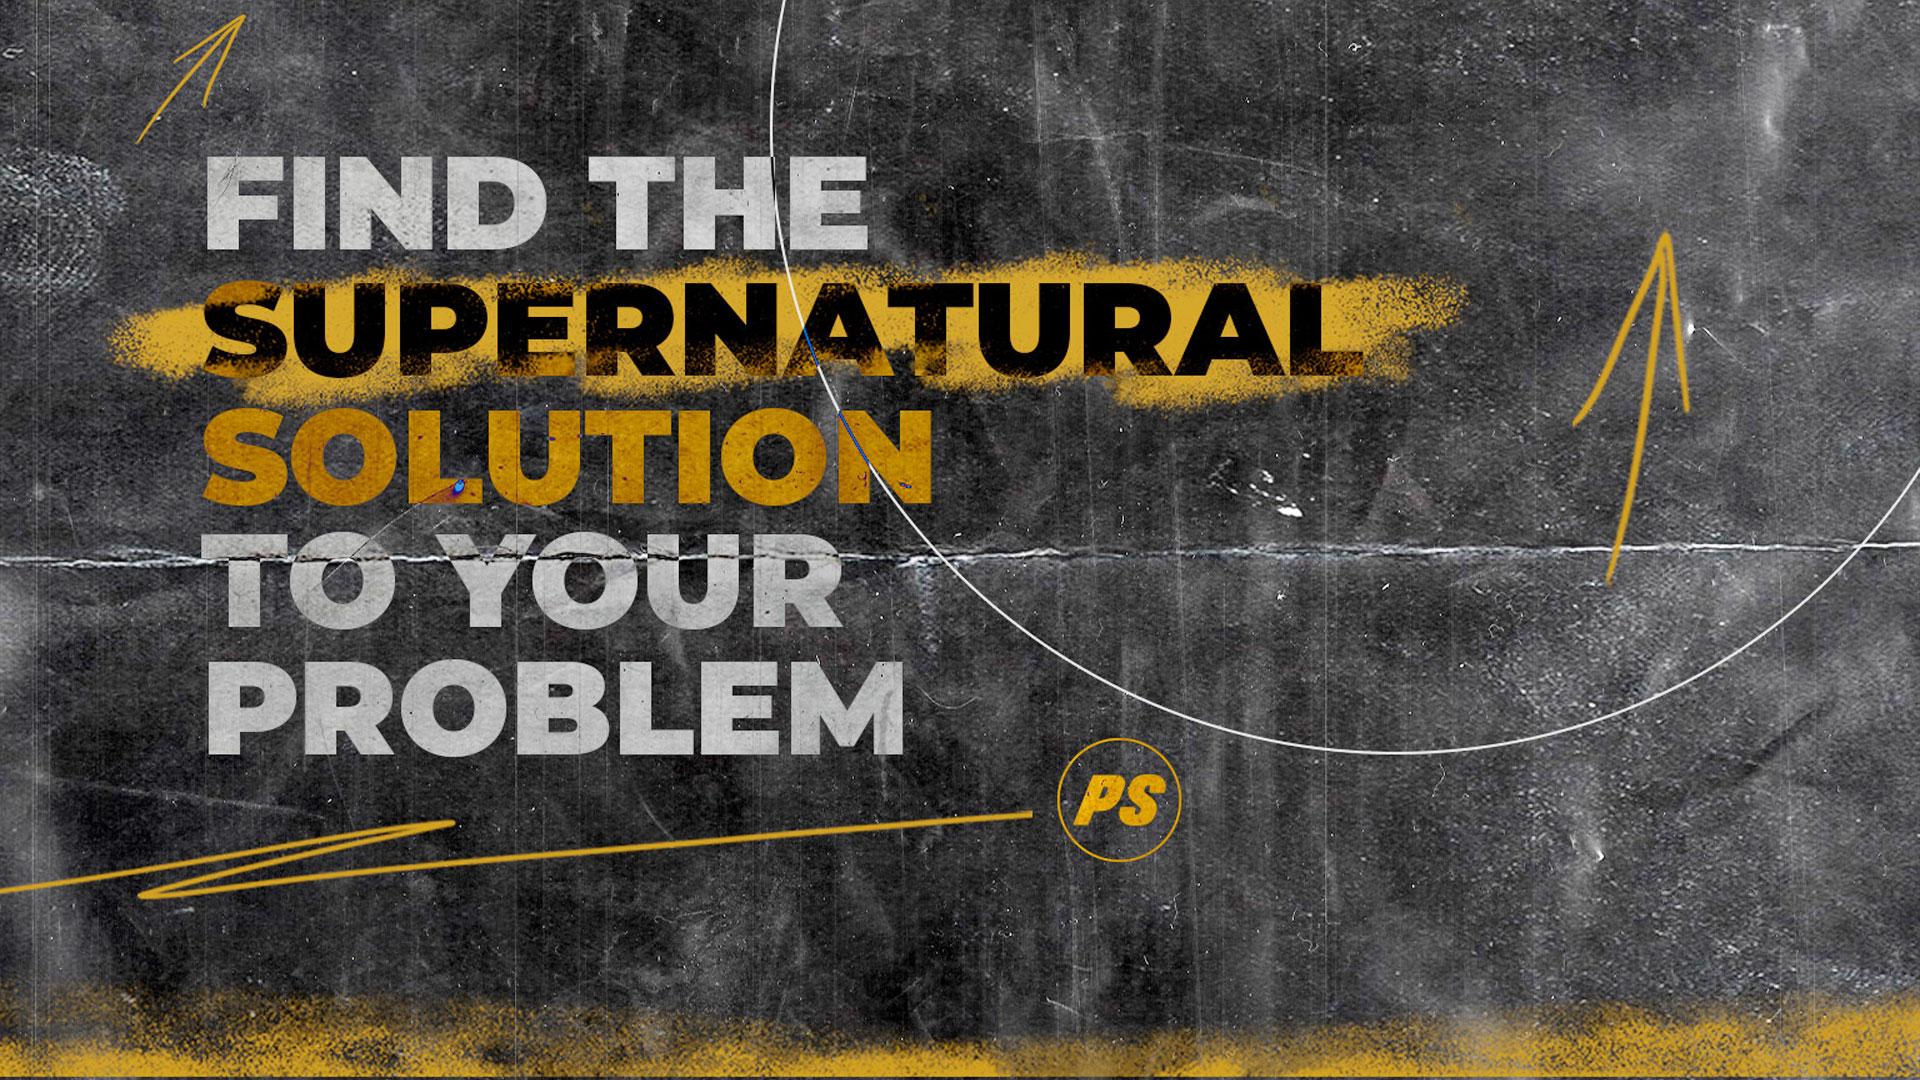 Featured image for “Finding the Supernatural Solution to Your Problem”